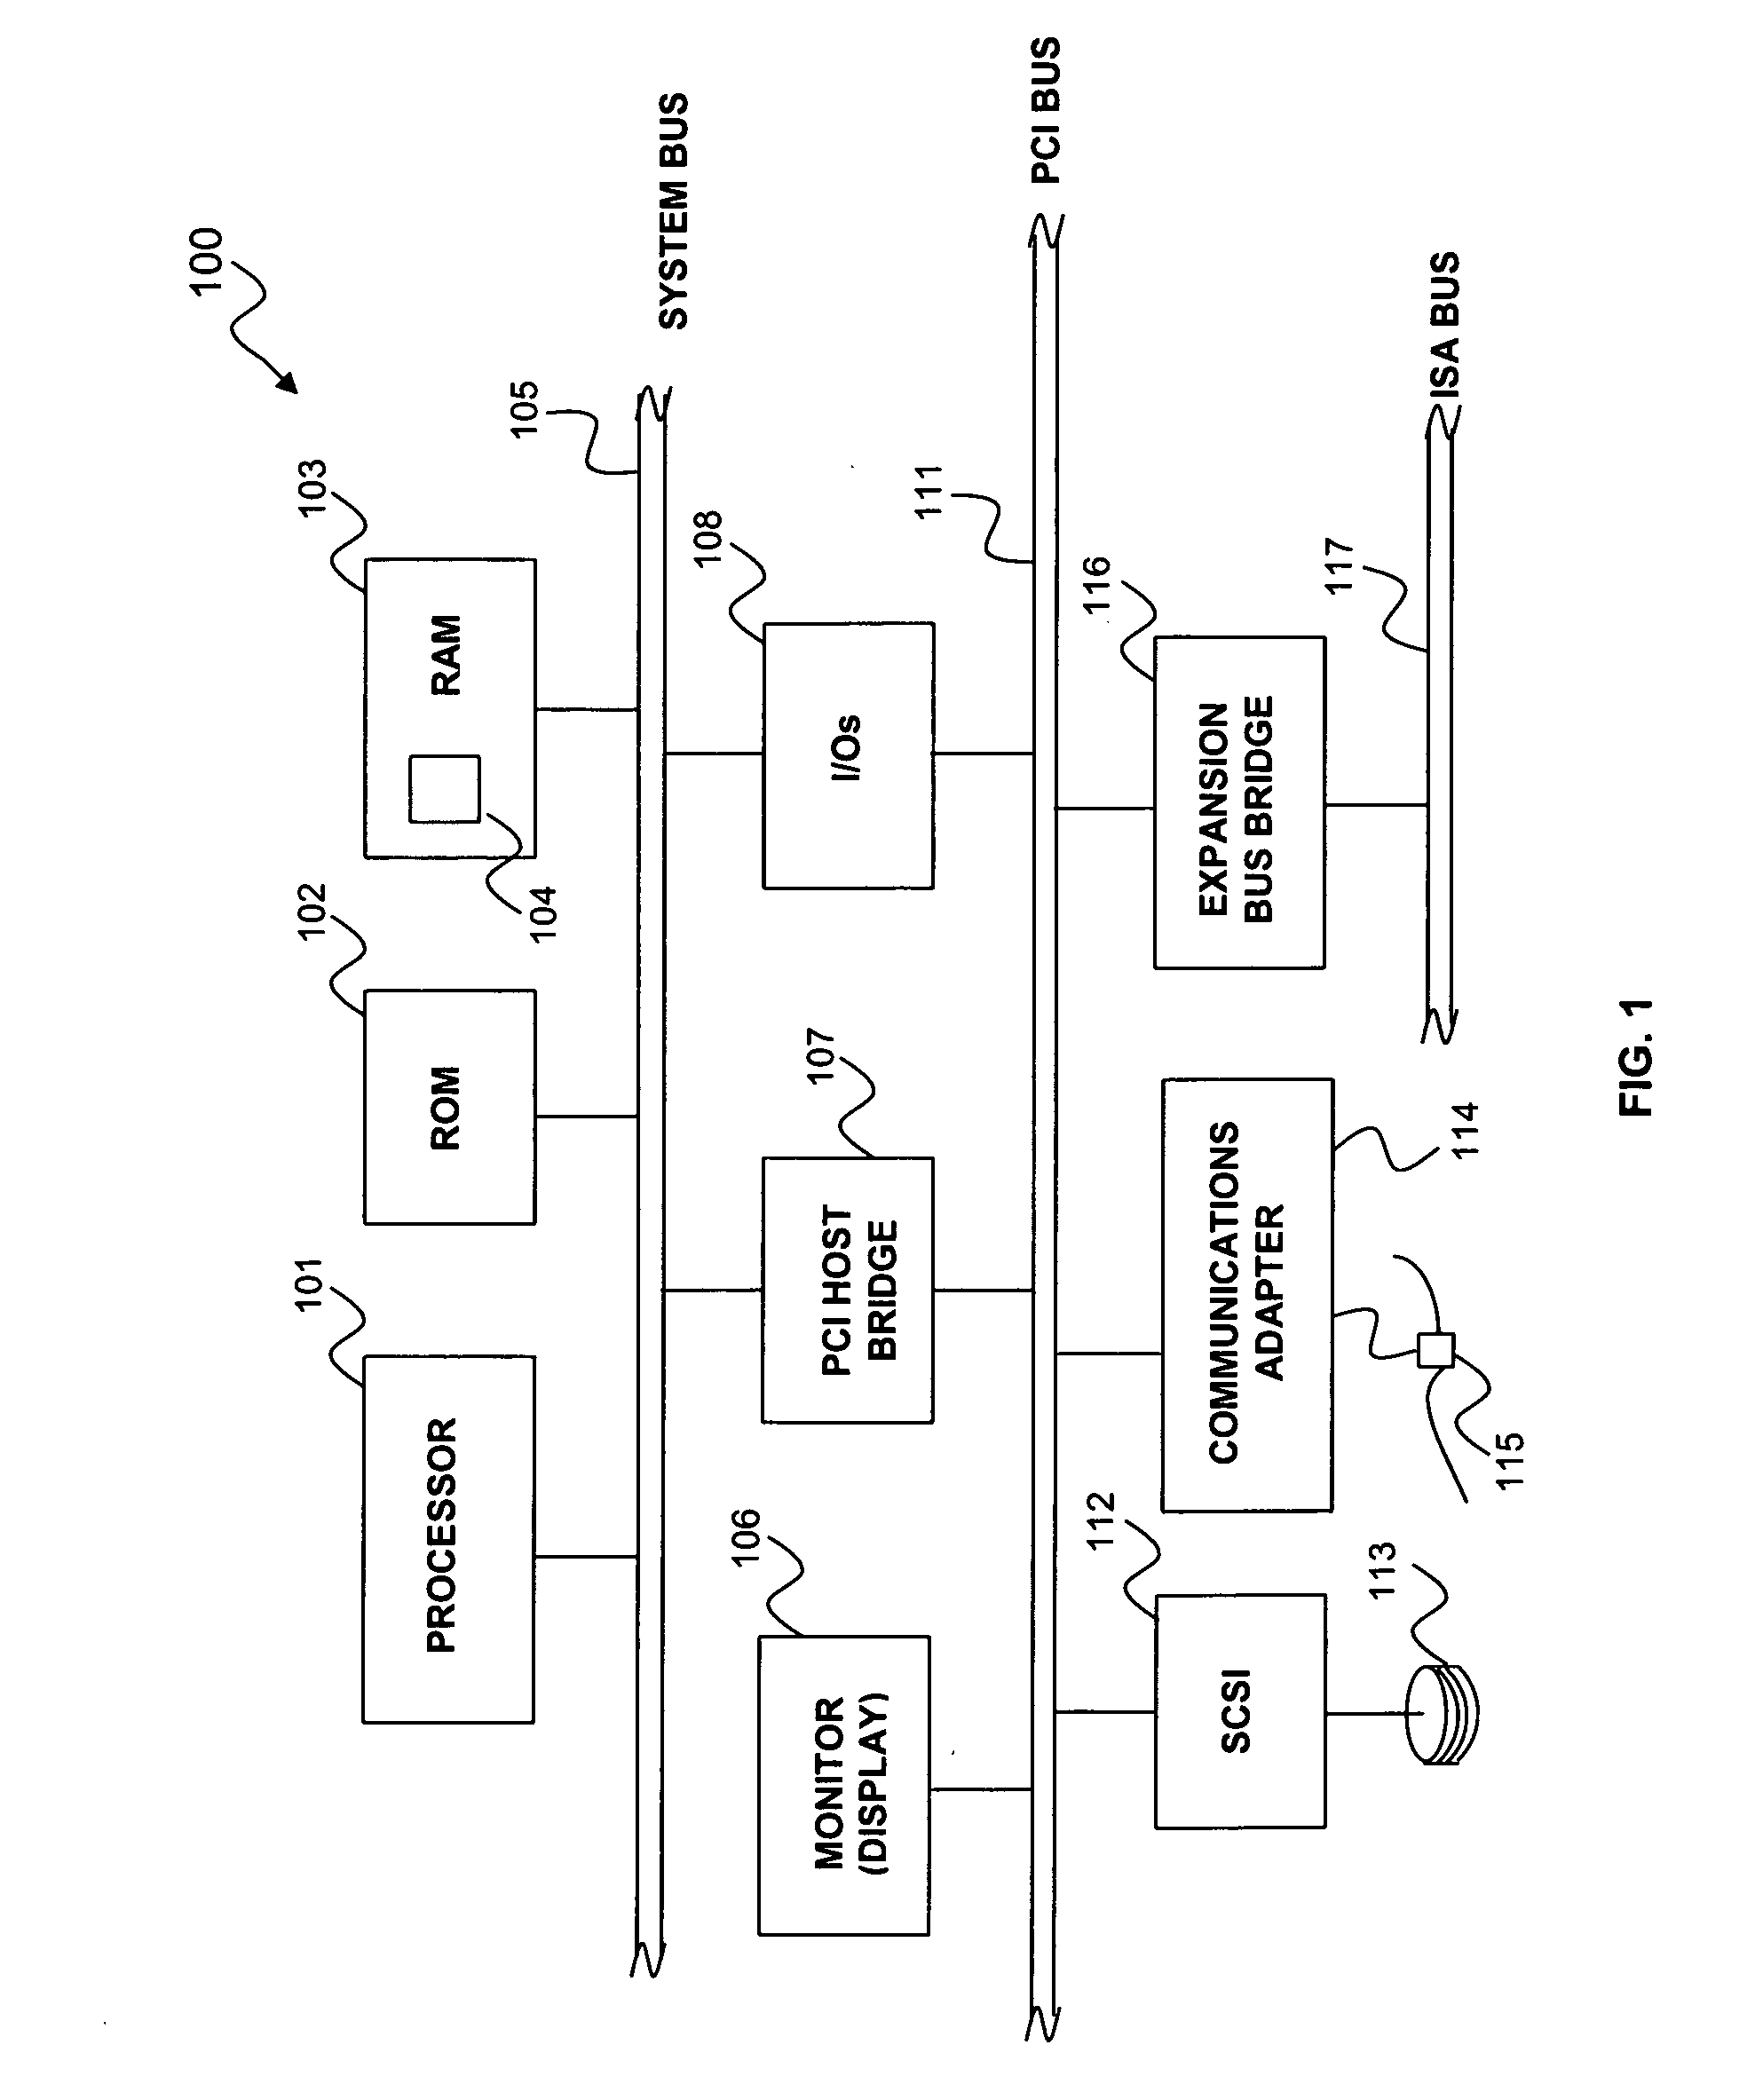 Method and system for creating and utilizing virtual hardware resources